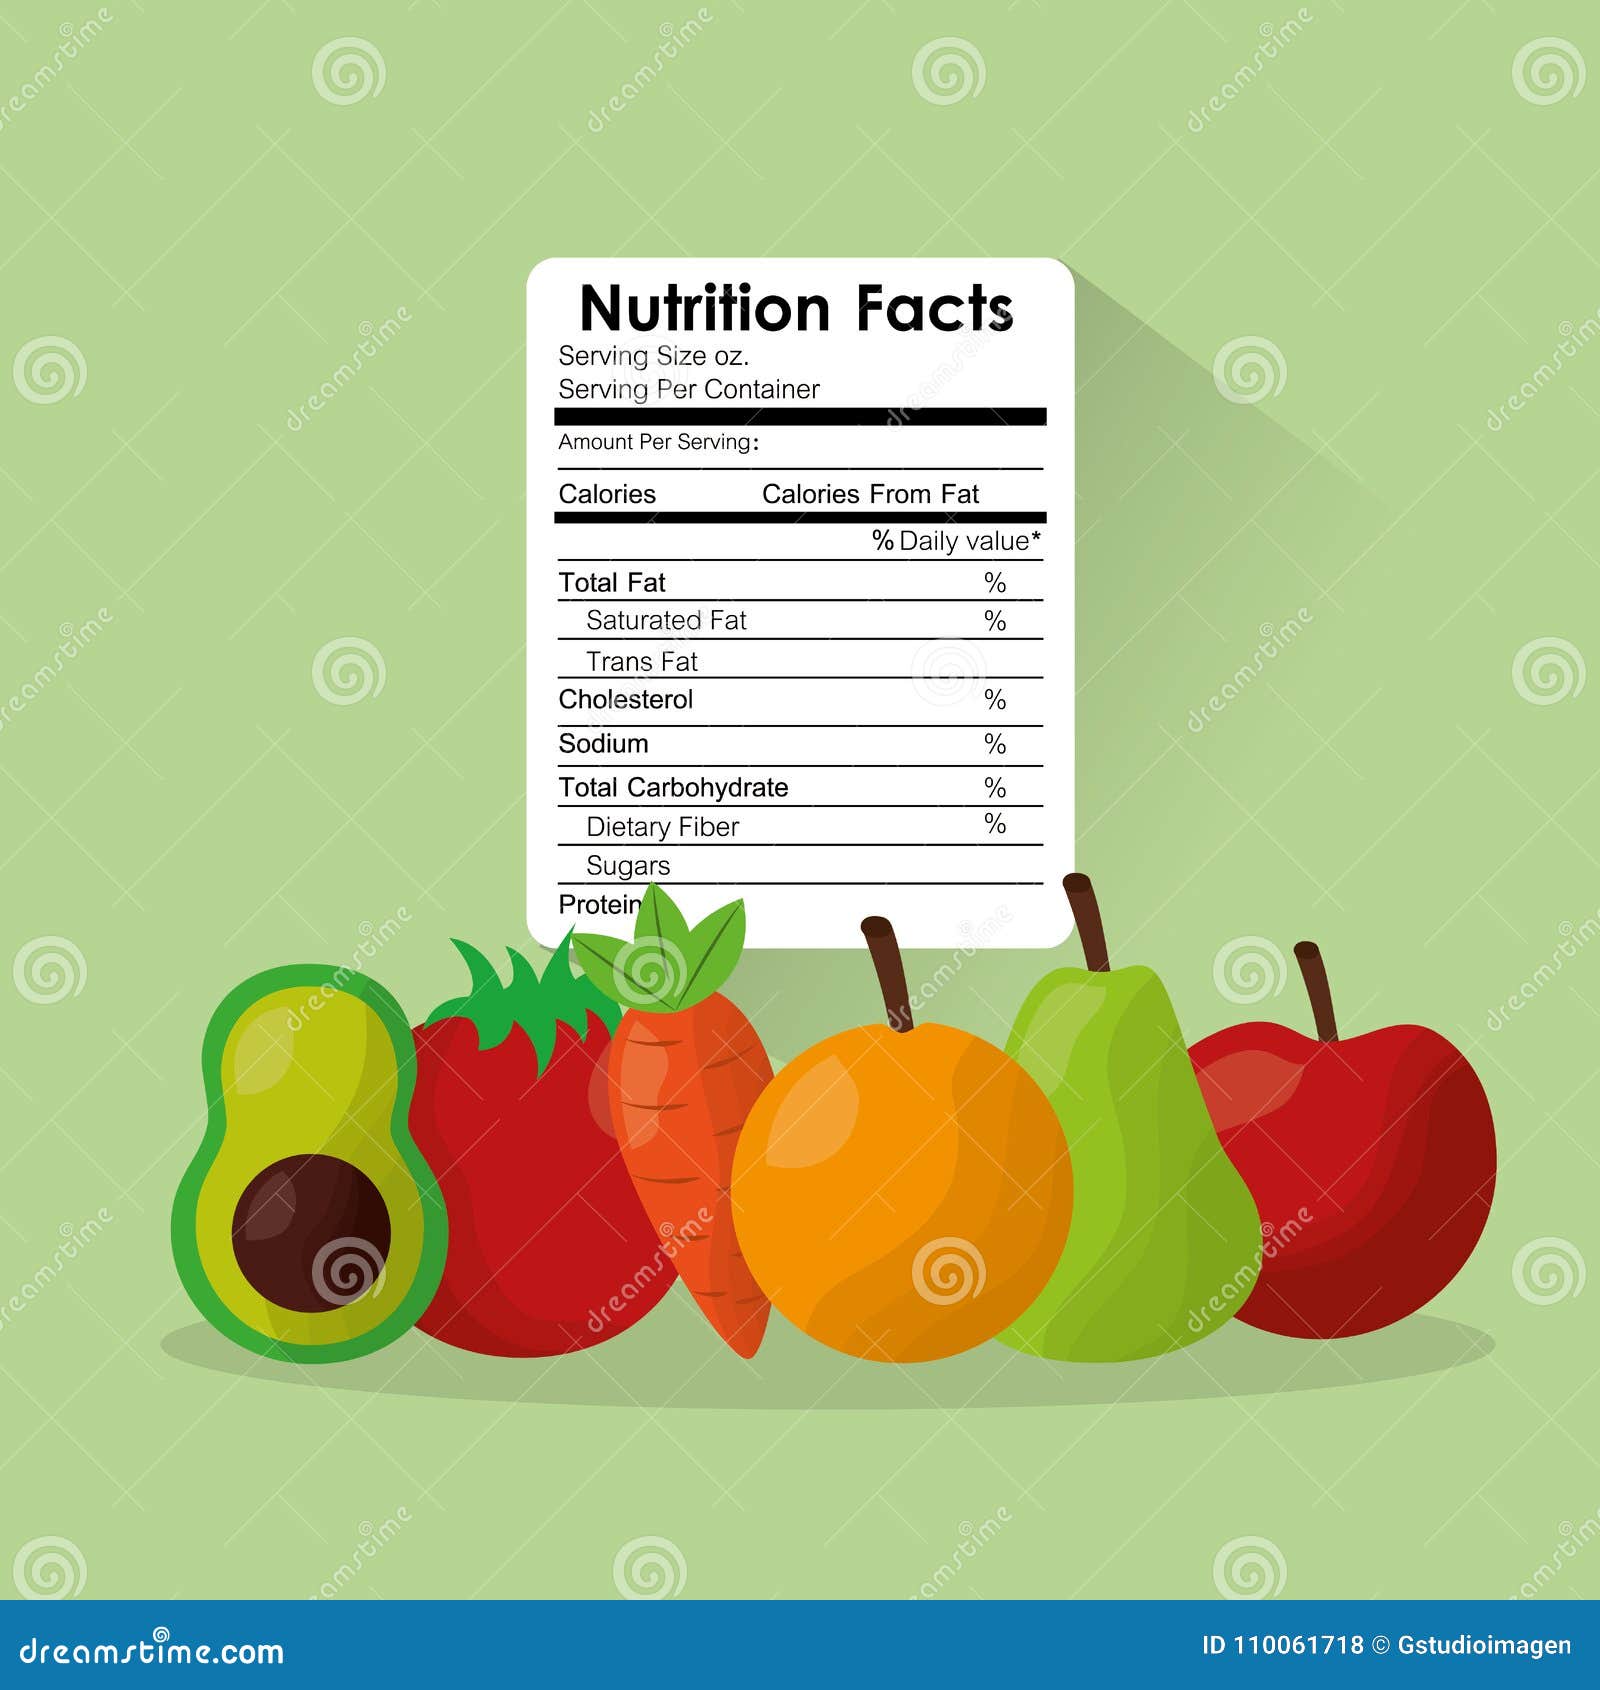 Fruit And Vegetables Healthy Food Nutrition Facts Label Benefits Stock